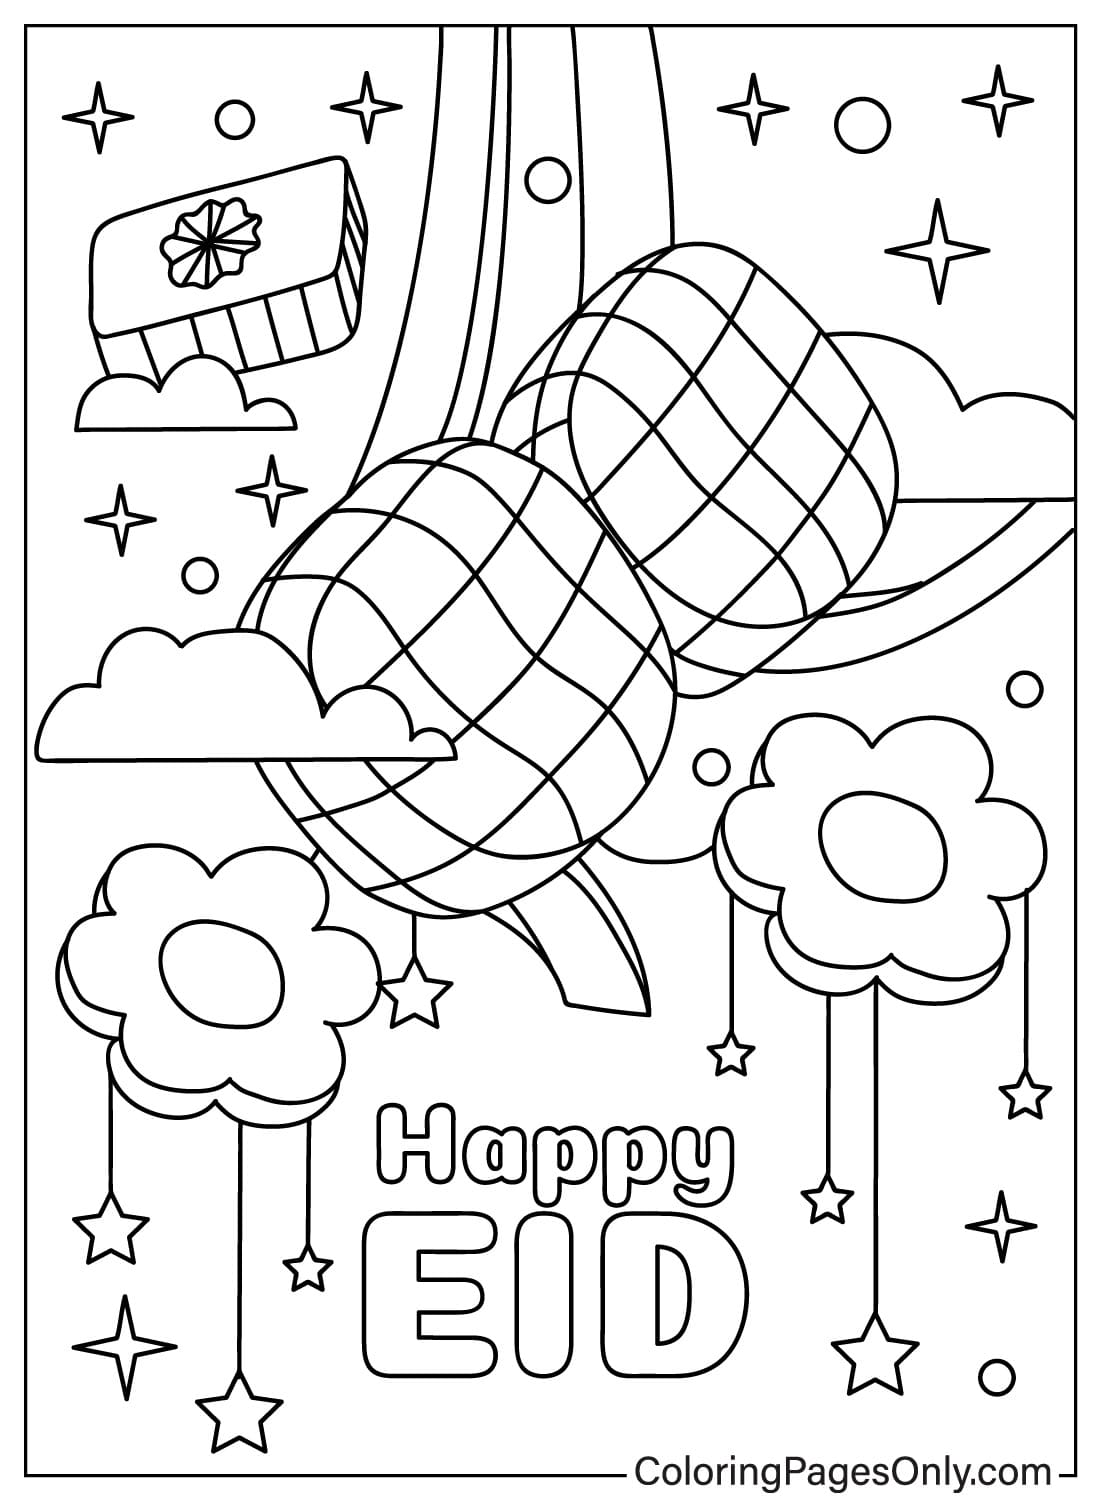 Eid Al-Fitr Images to Color from Eid Al-Fitr